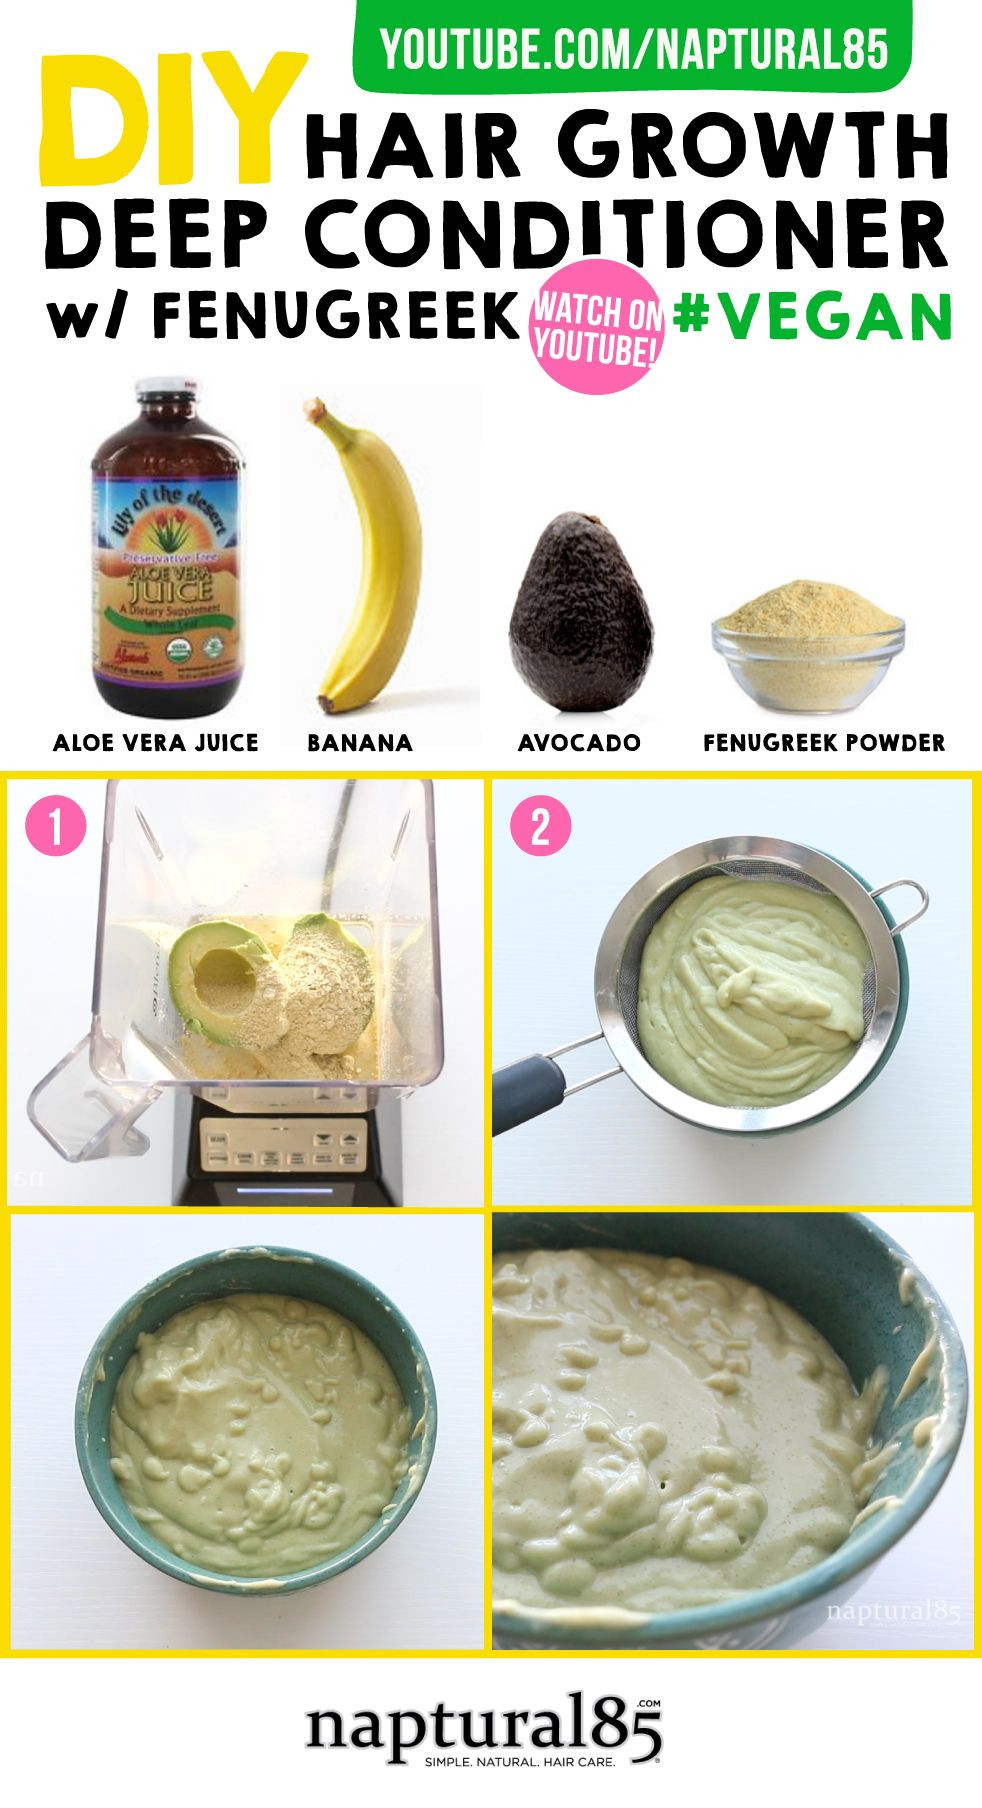 DIY Deep Conditioner For Hair Growth
 I ve been meaning to try a mask with banana and avocado